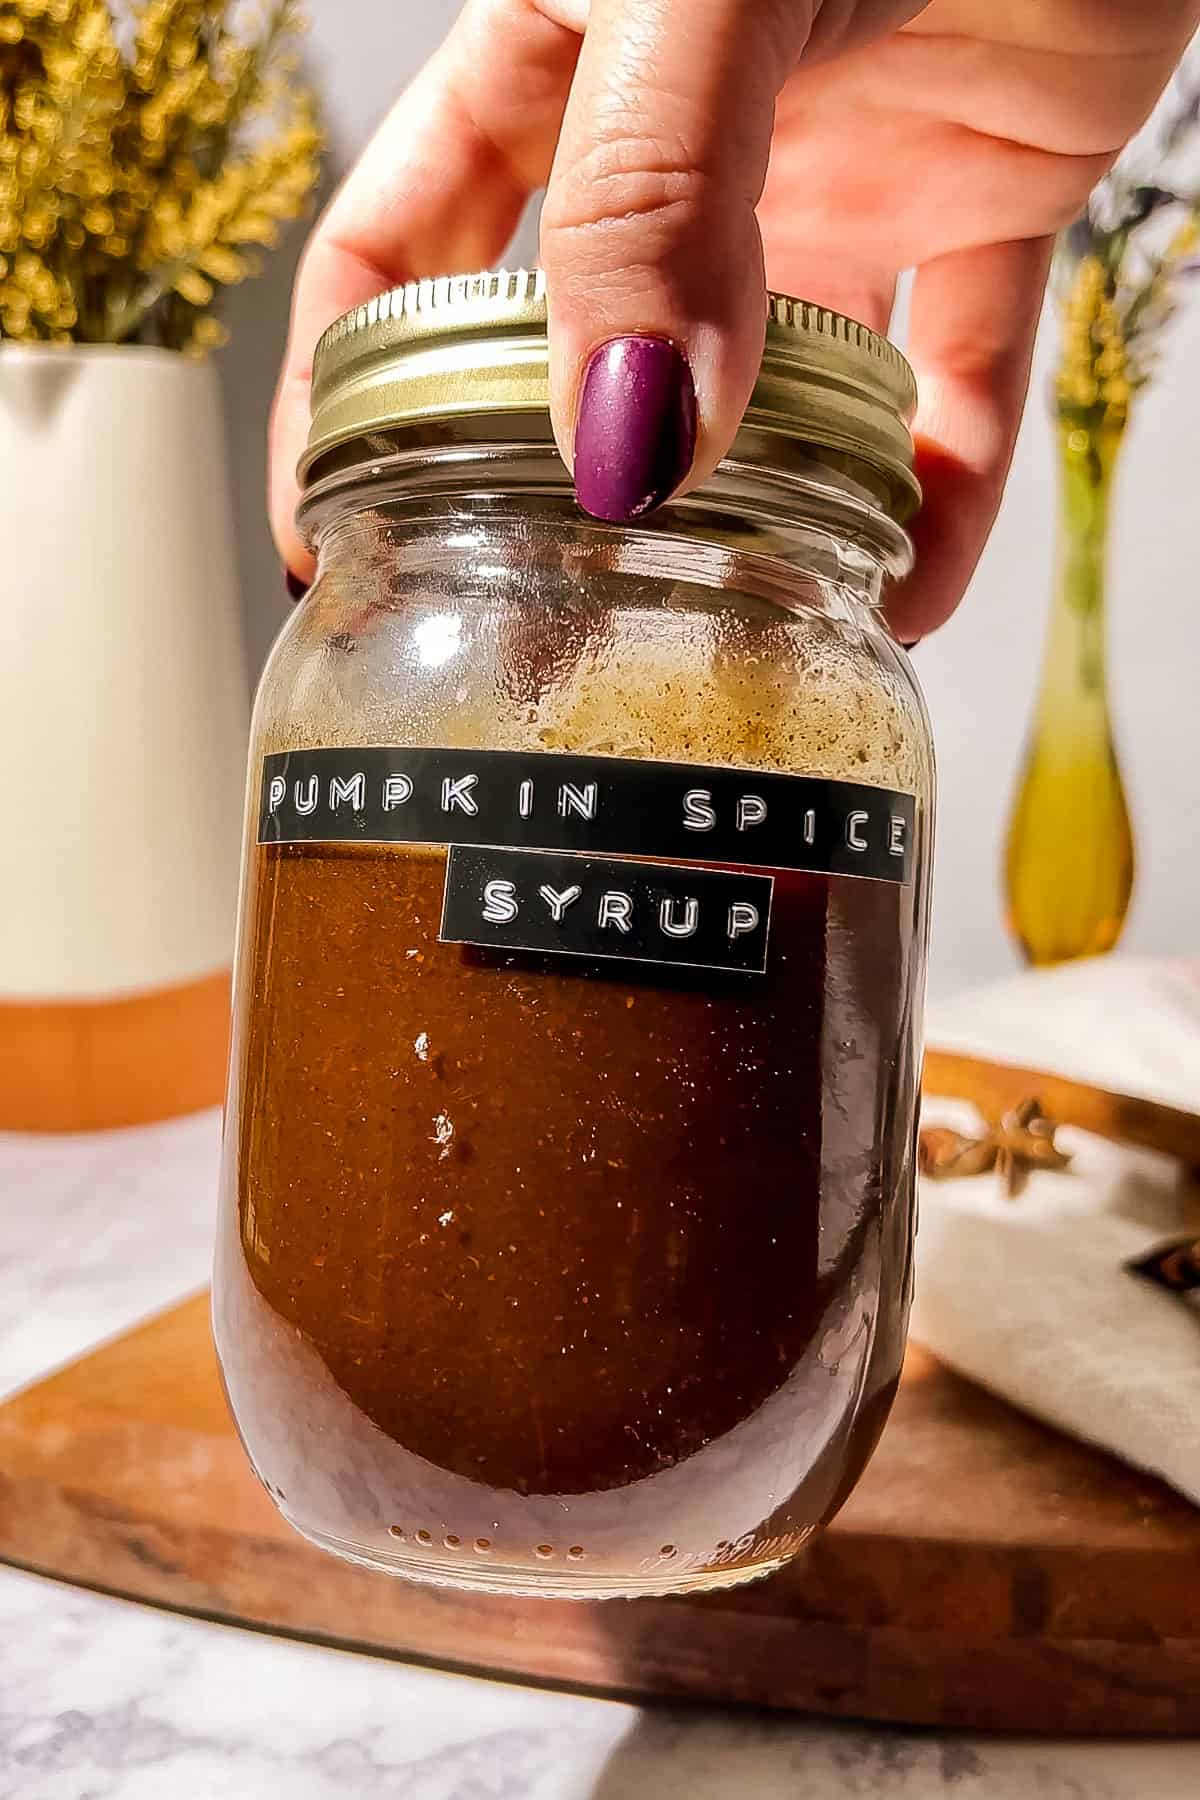 Someone holding the jar of syrup in their hand.